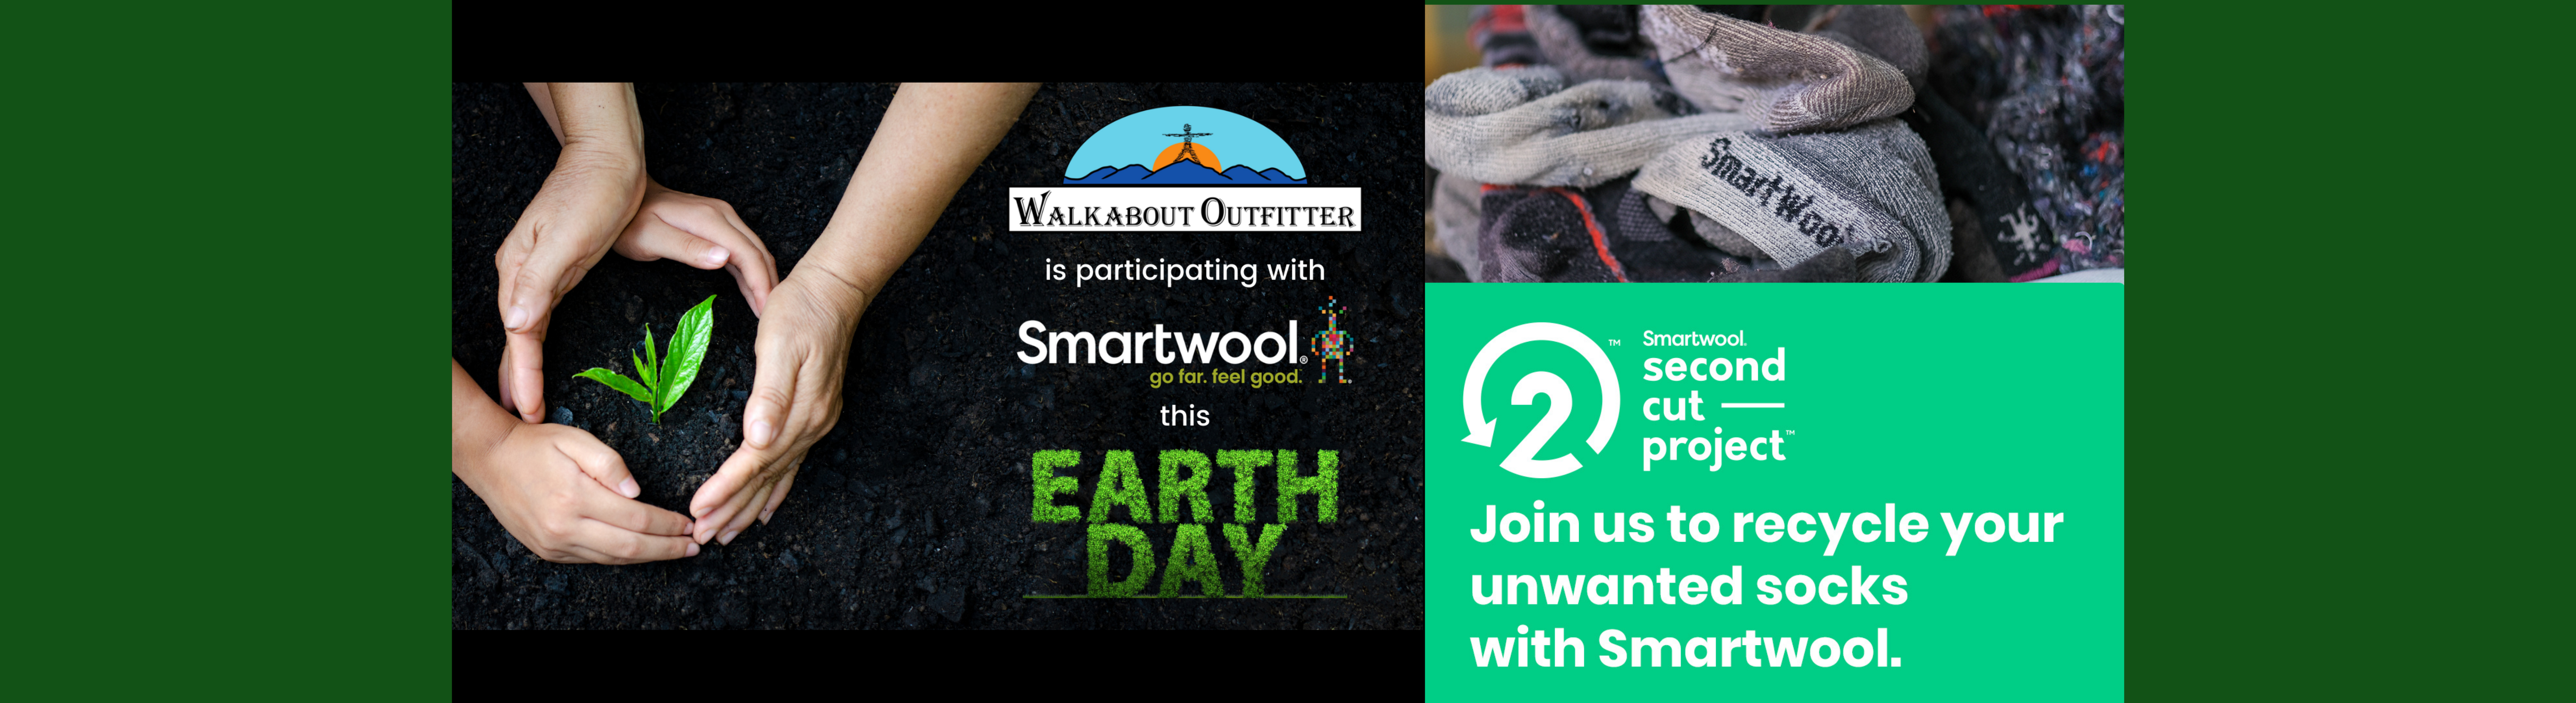 Walkabout wants your old (clean) socks for Earth Day! - April 22 through May 2